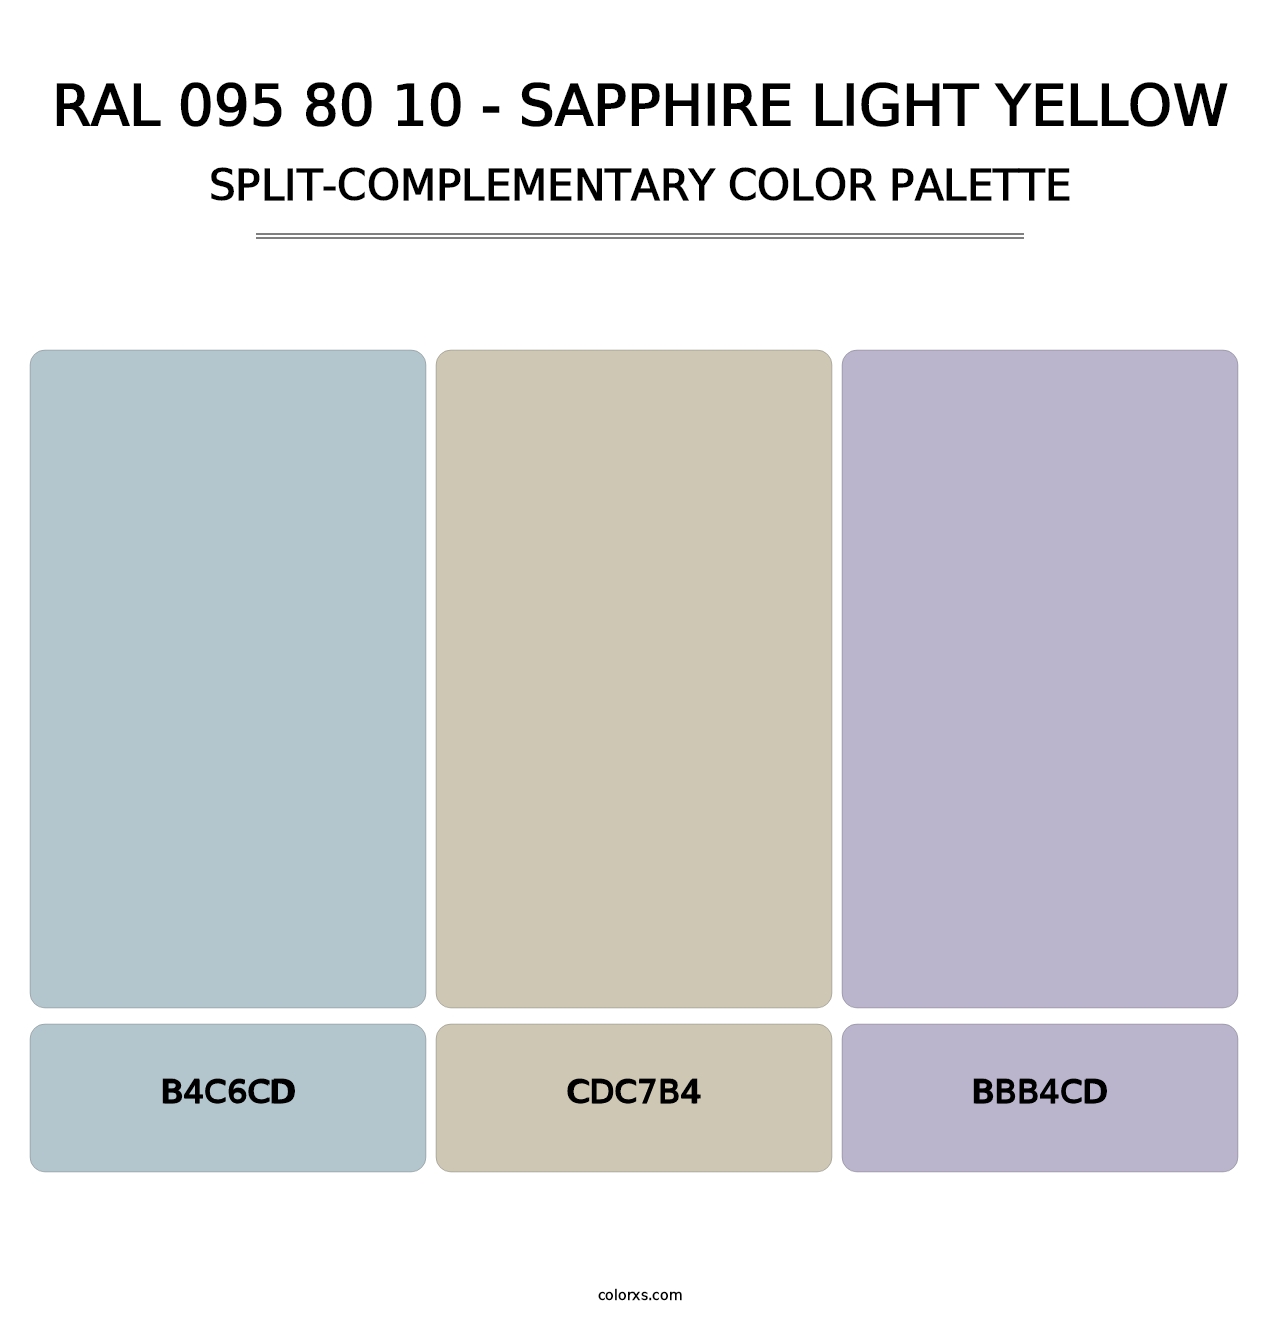 RAL 095 80 10 - Sapphire Light Yellow - Split-Complementary Color Palette